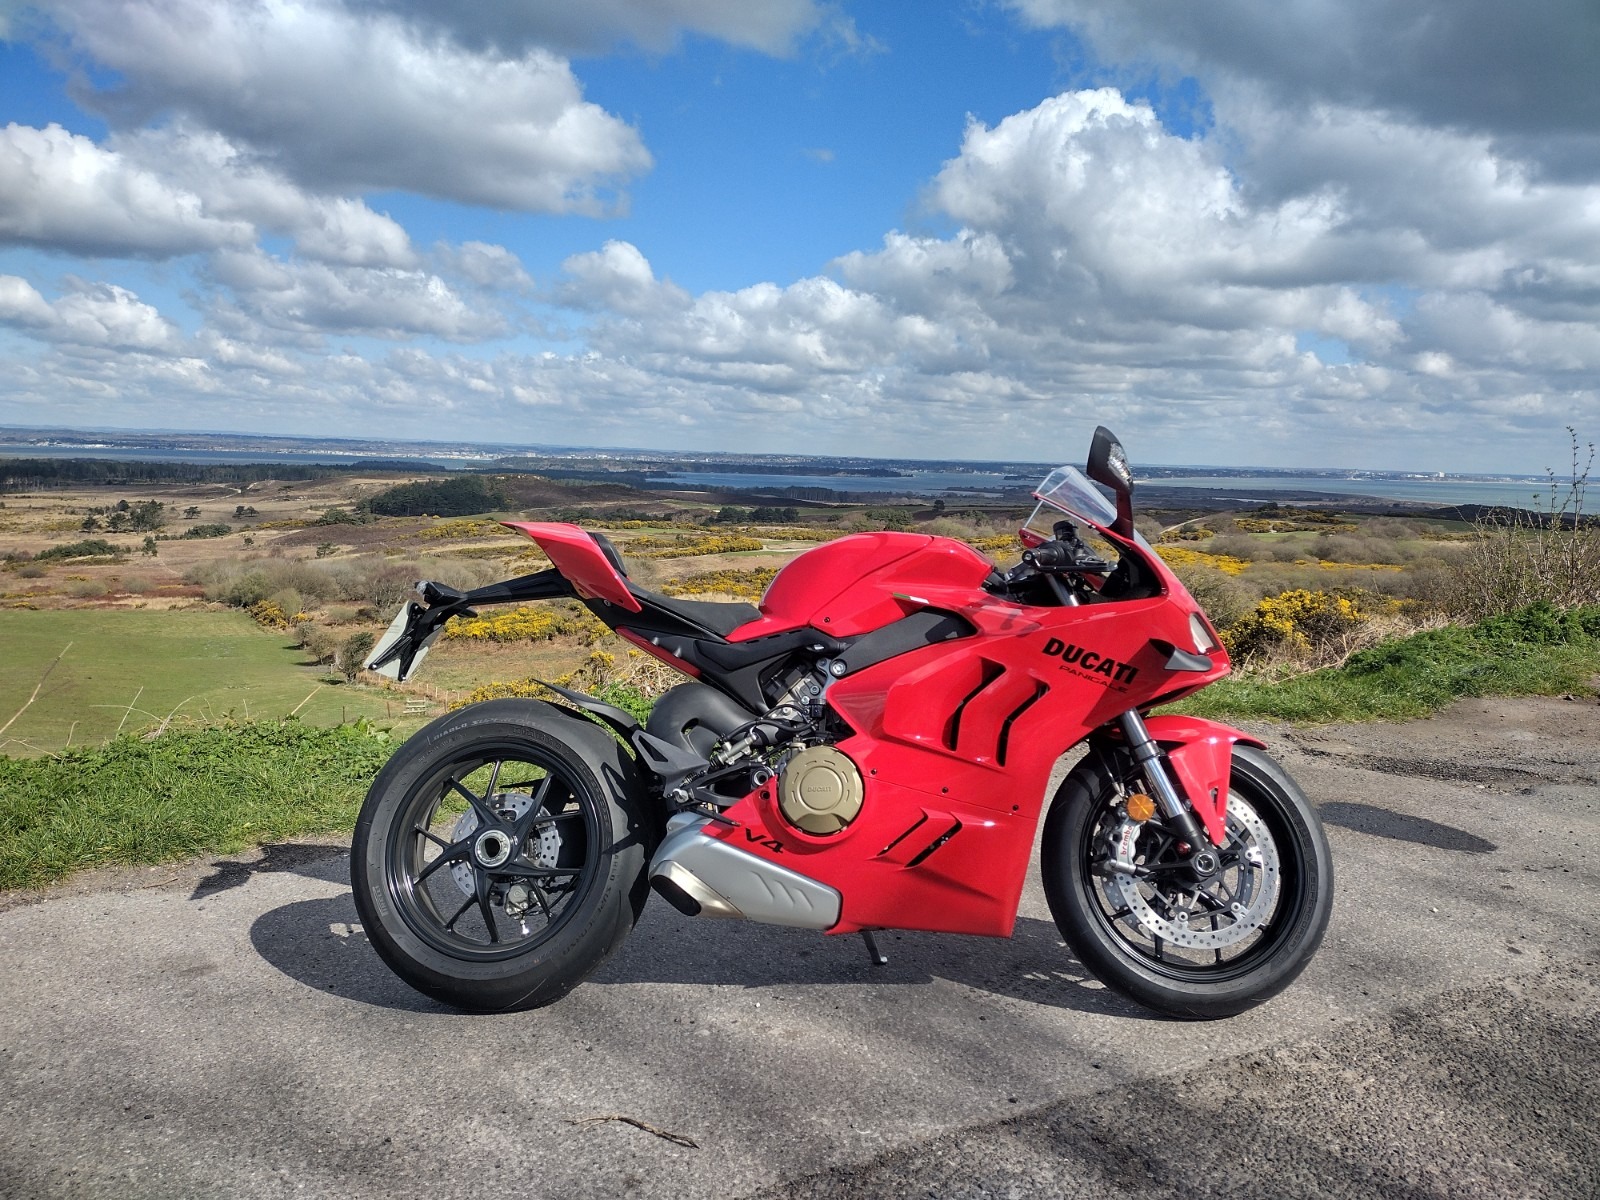 Breeze Motor Group announces new venture with Ducati